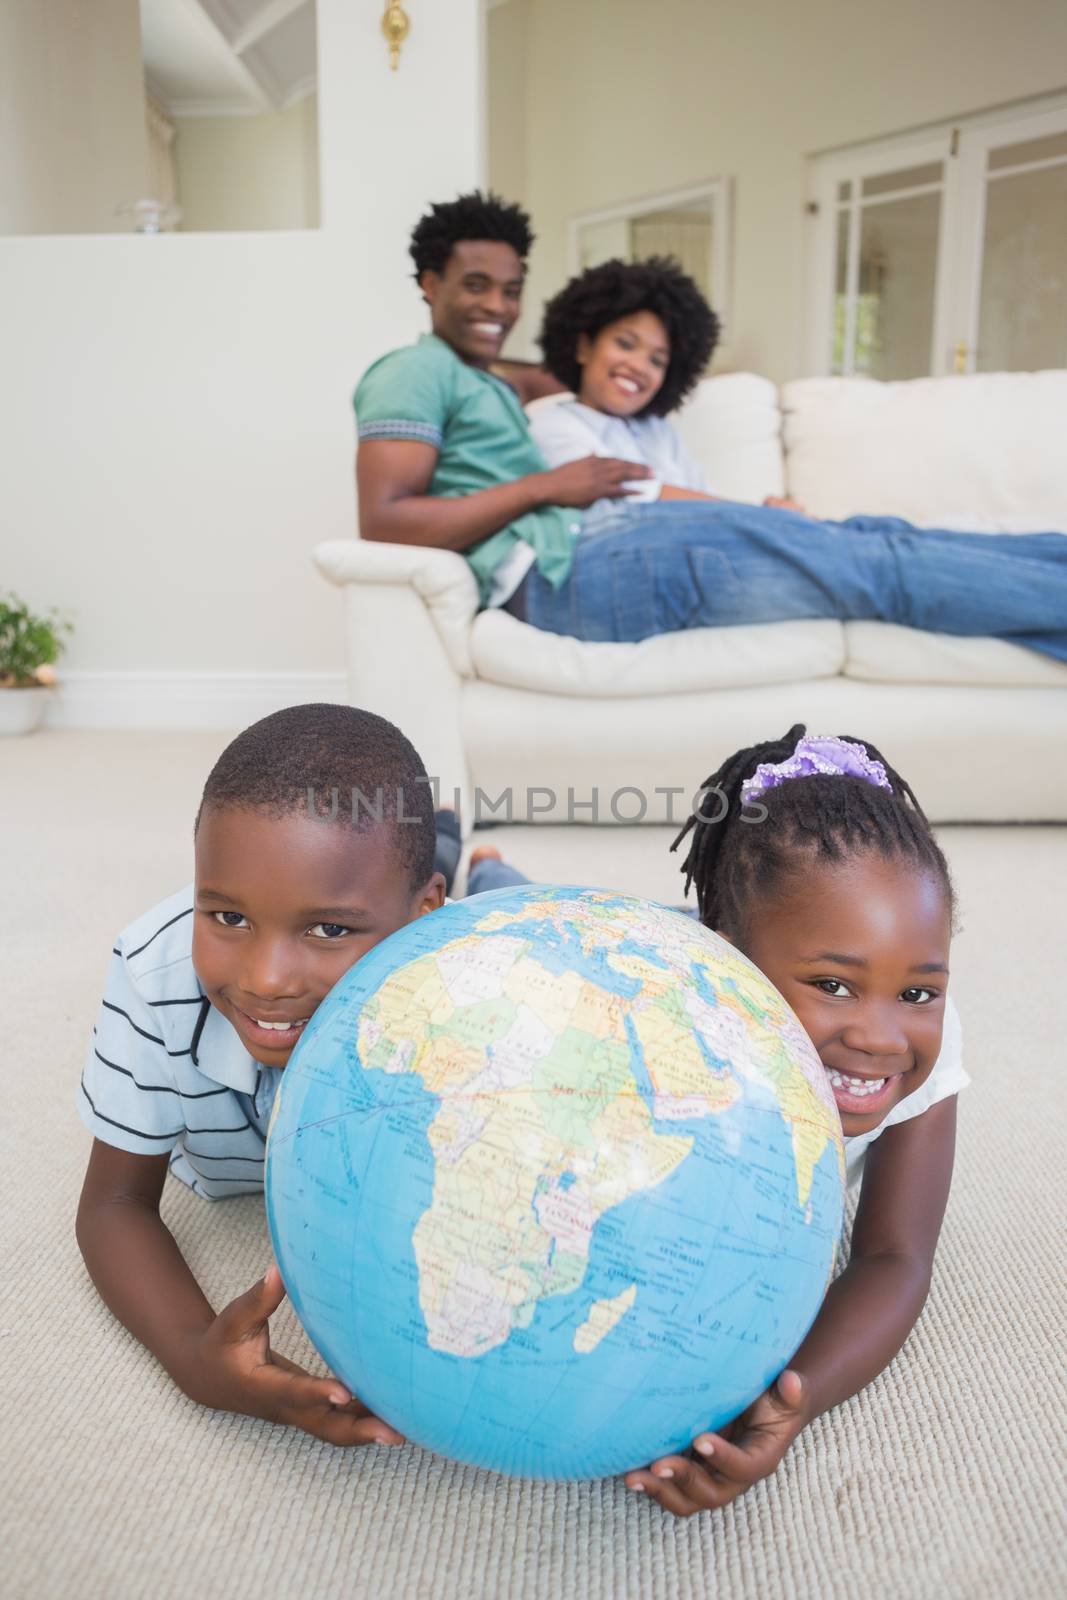 Happy siblings lying on the floor holding globe at home in the living room